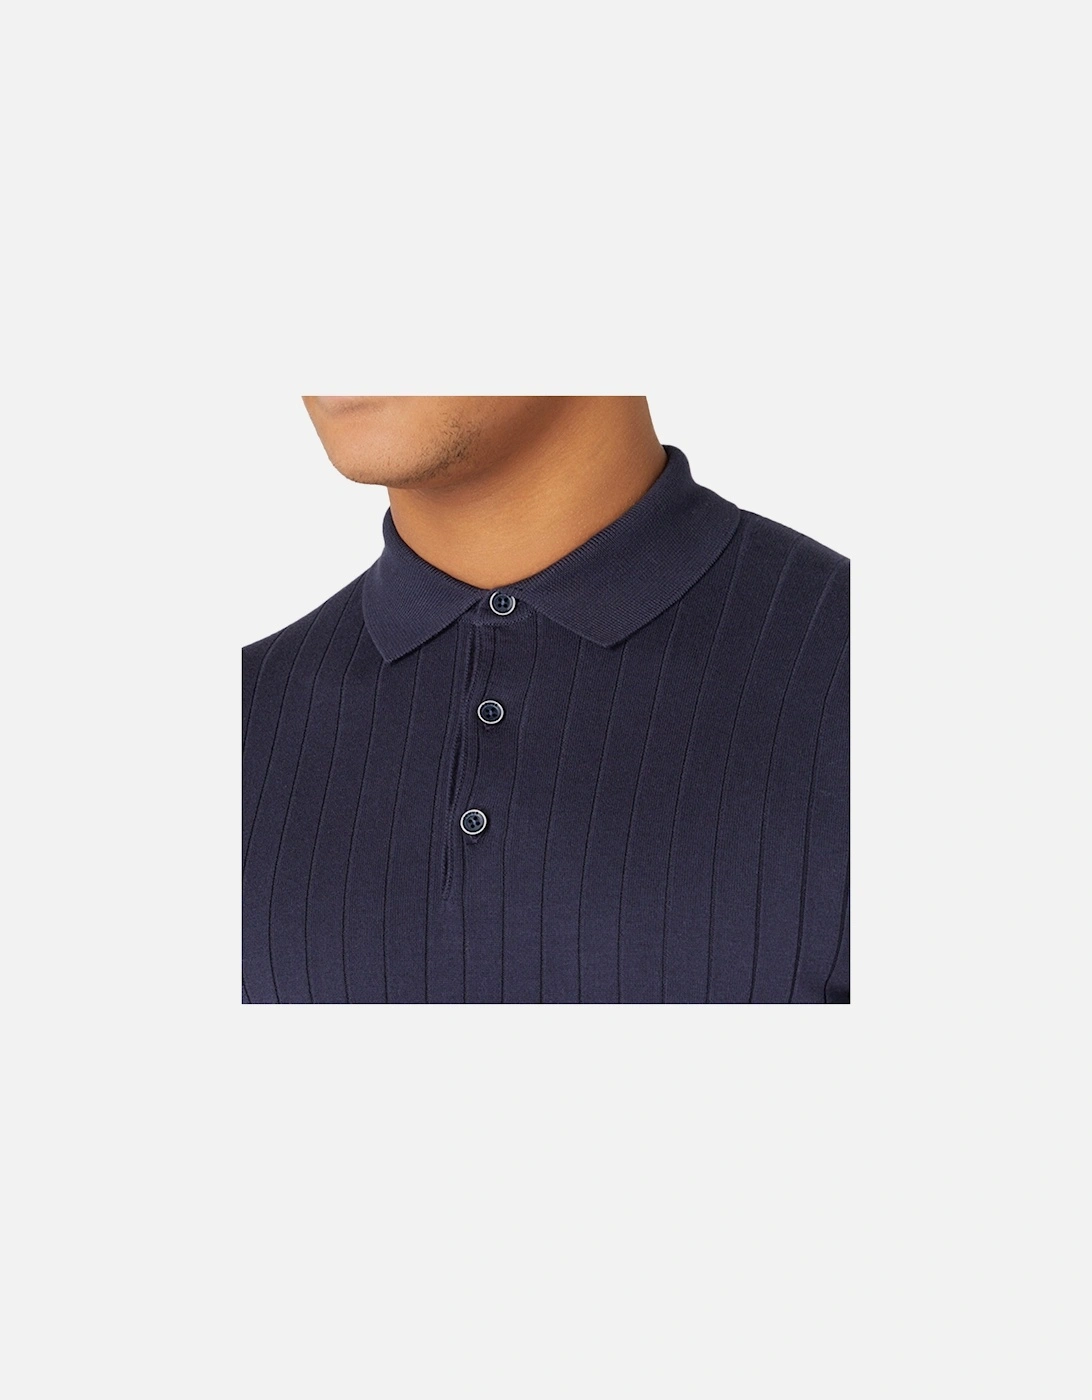 Mens Knitted S/S Ribbed Polo Shirt (Navy)